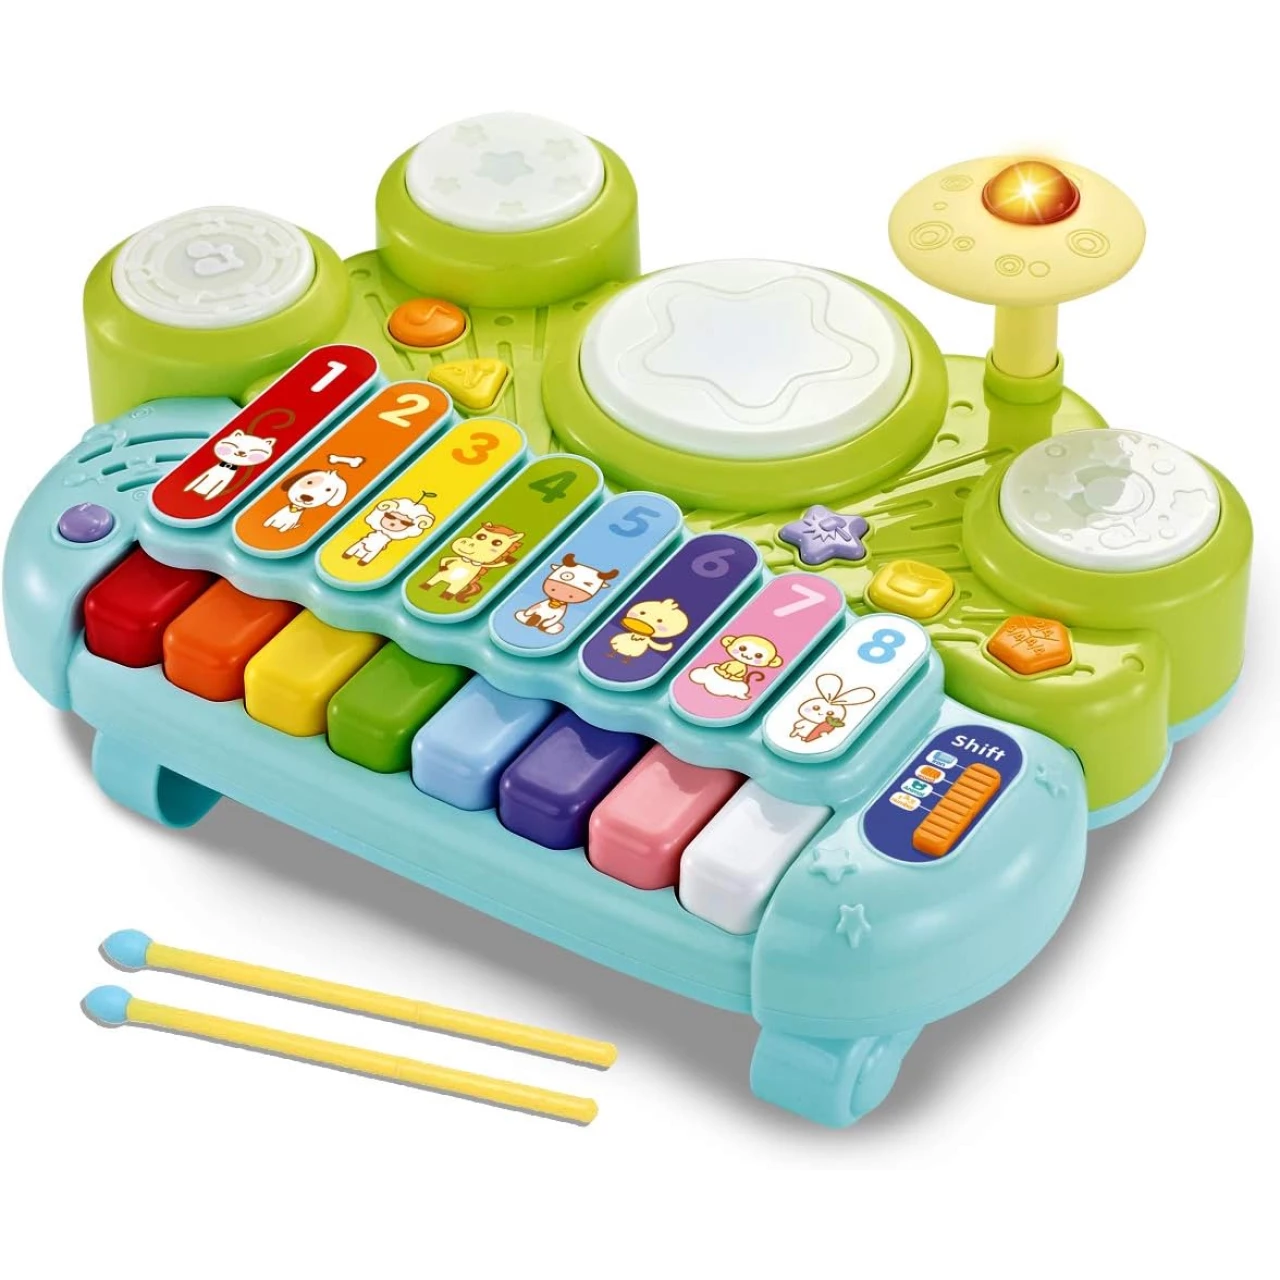 fisca 3 in 1 Musical Instruments Toys, Electronic Piano Keyboard Xylophone Drum Set